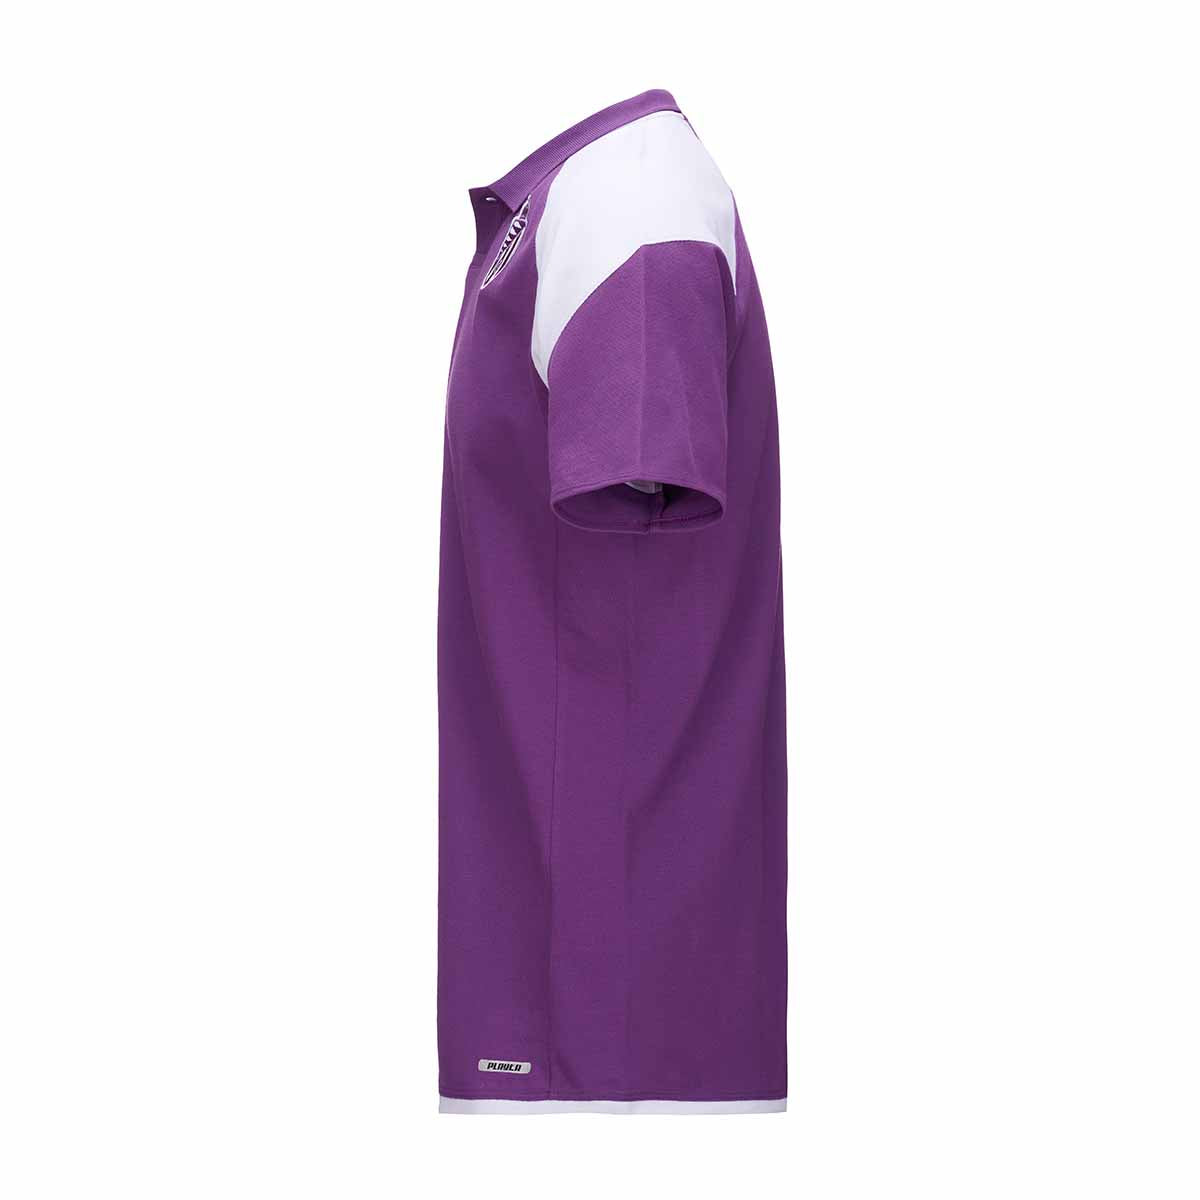 Polo Angat 7 Valladolid 23/24 Violet Homme